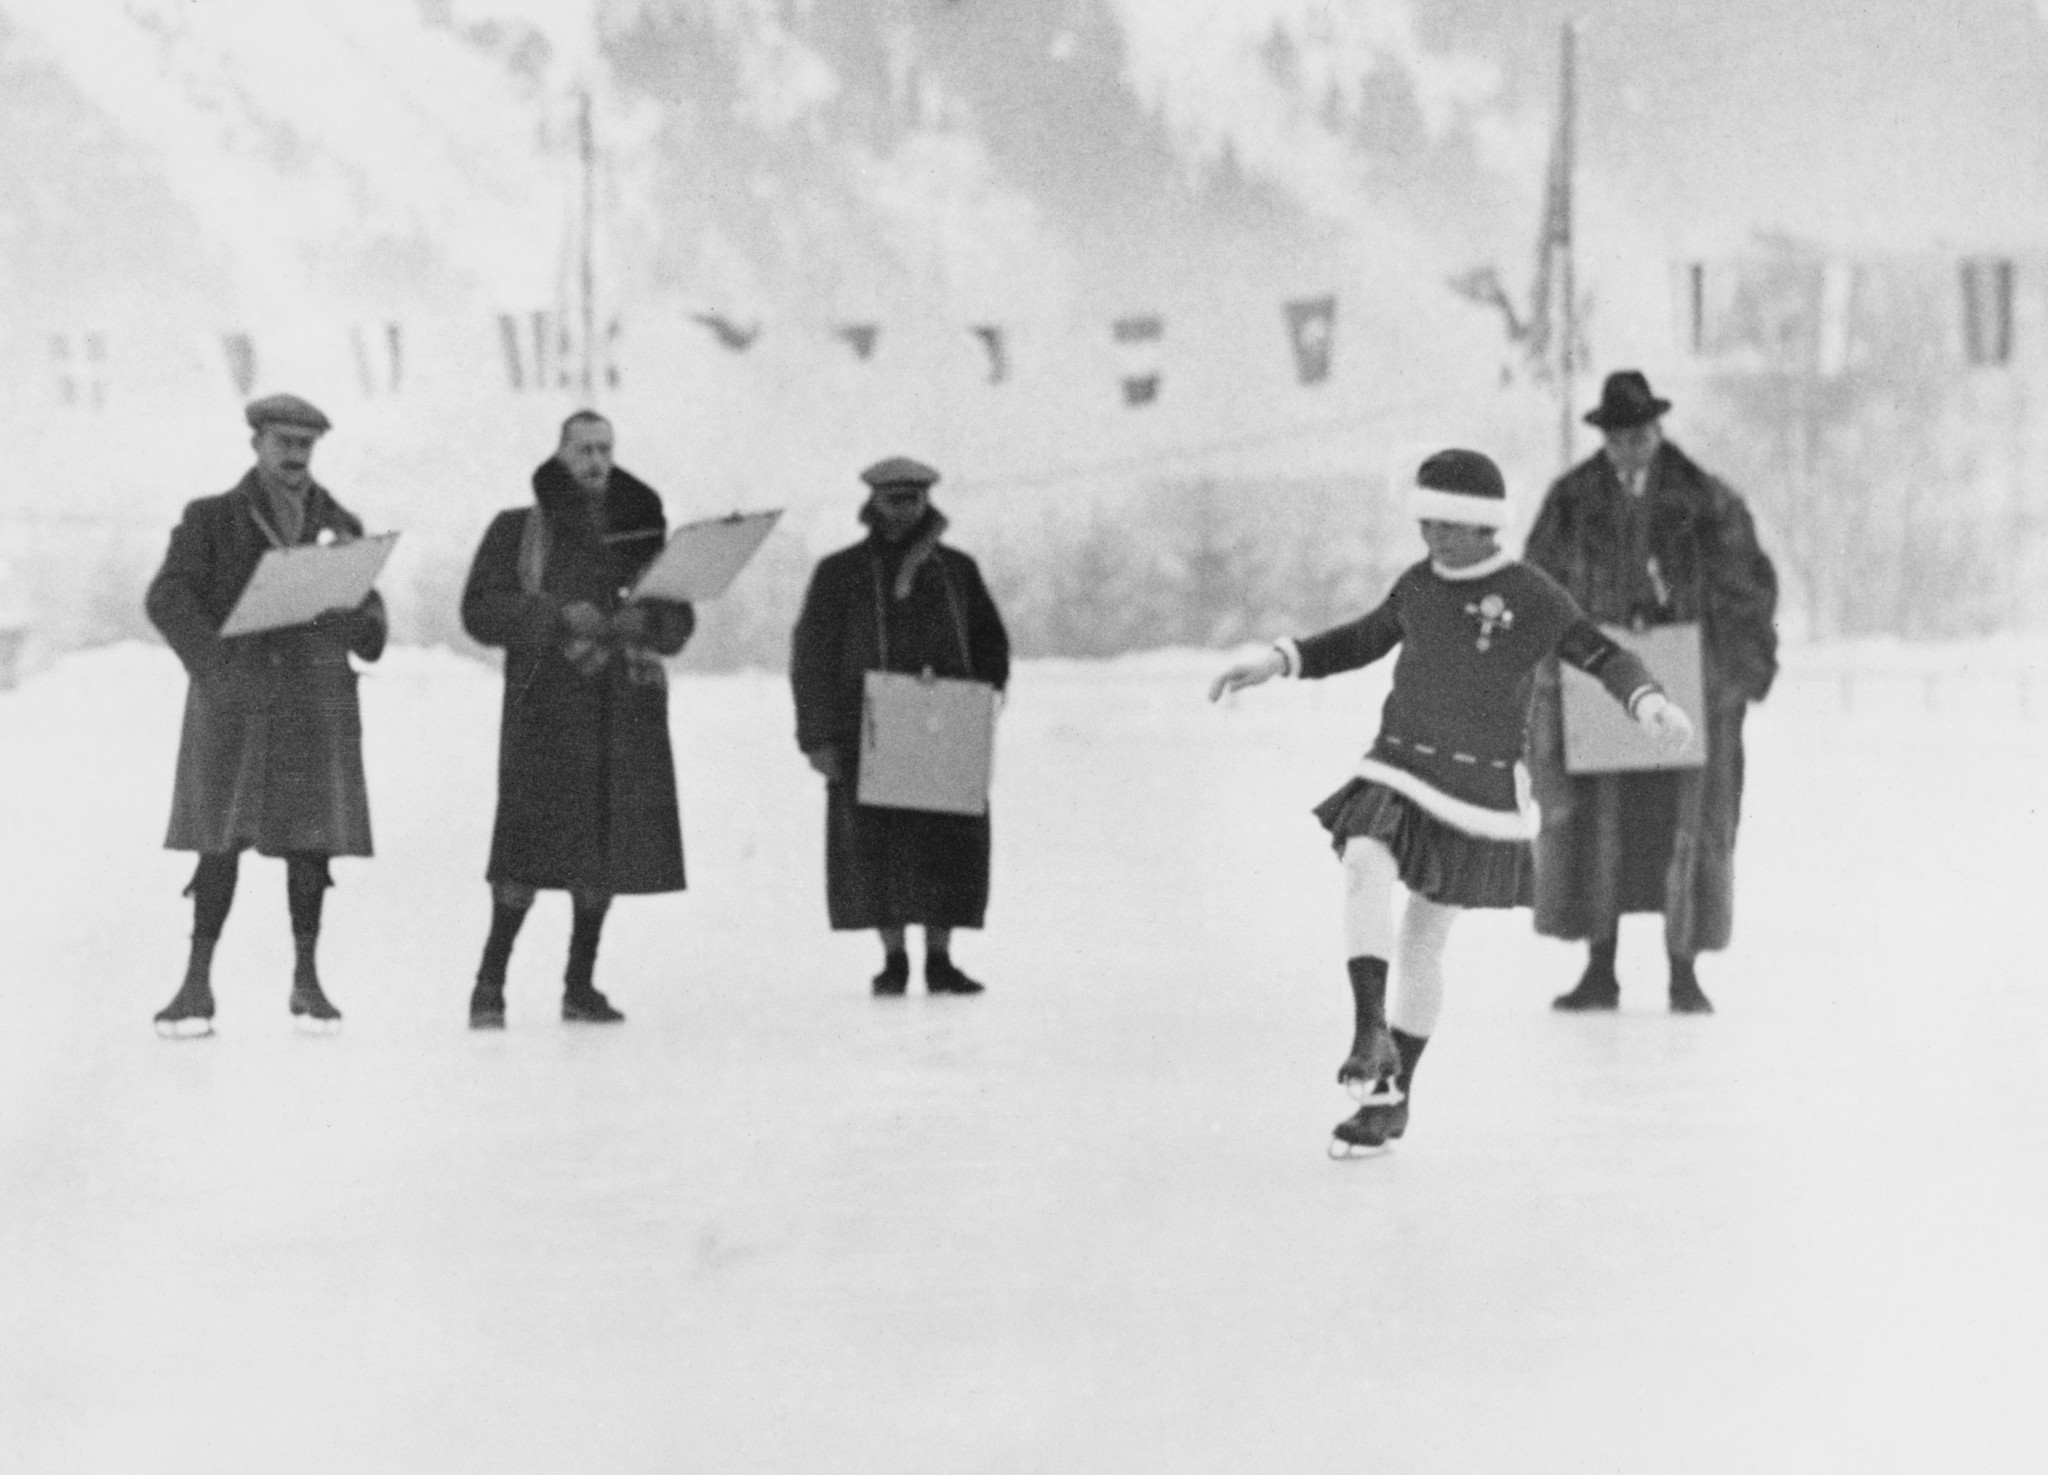 It was not until 1924 in Chamonix that the Winter Olympics started ©Getty Images